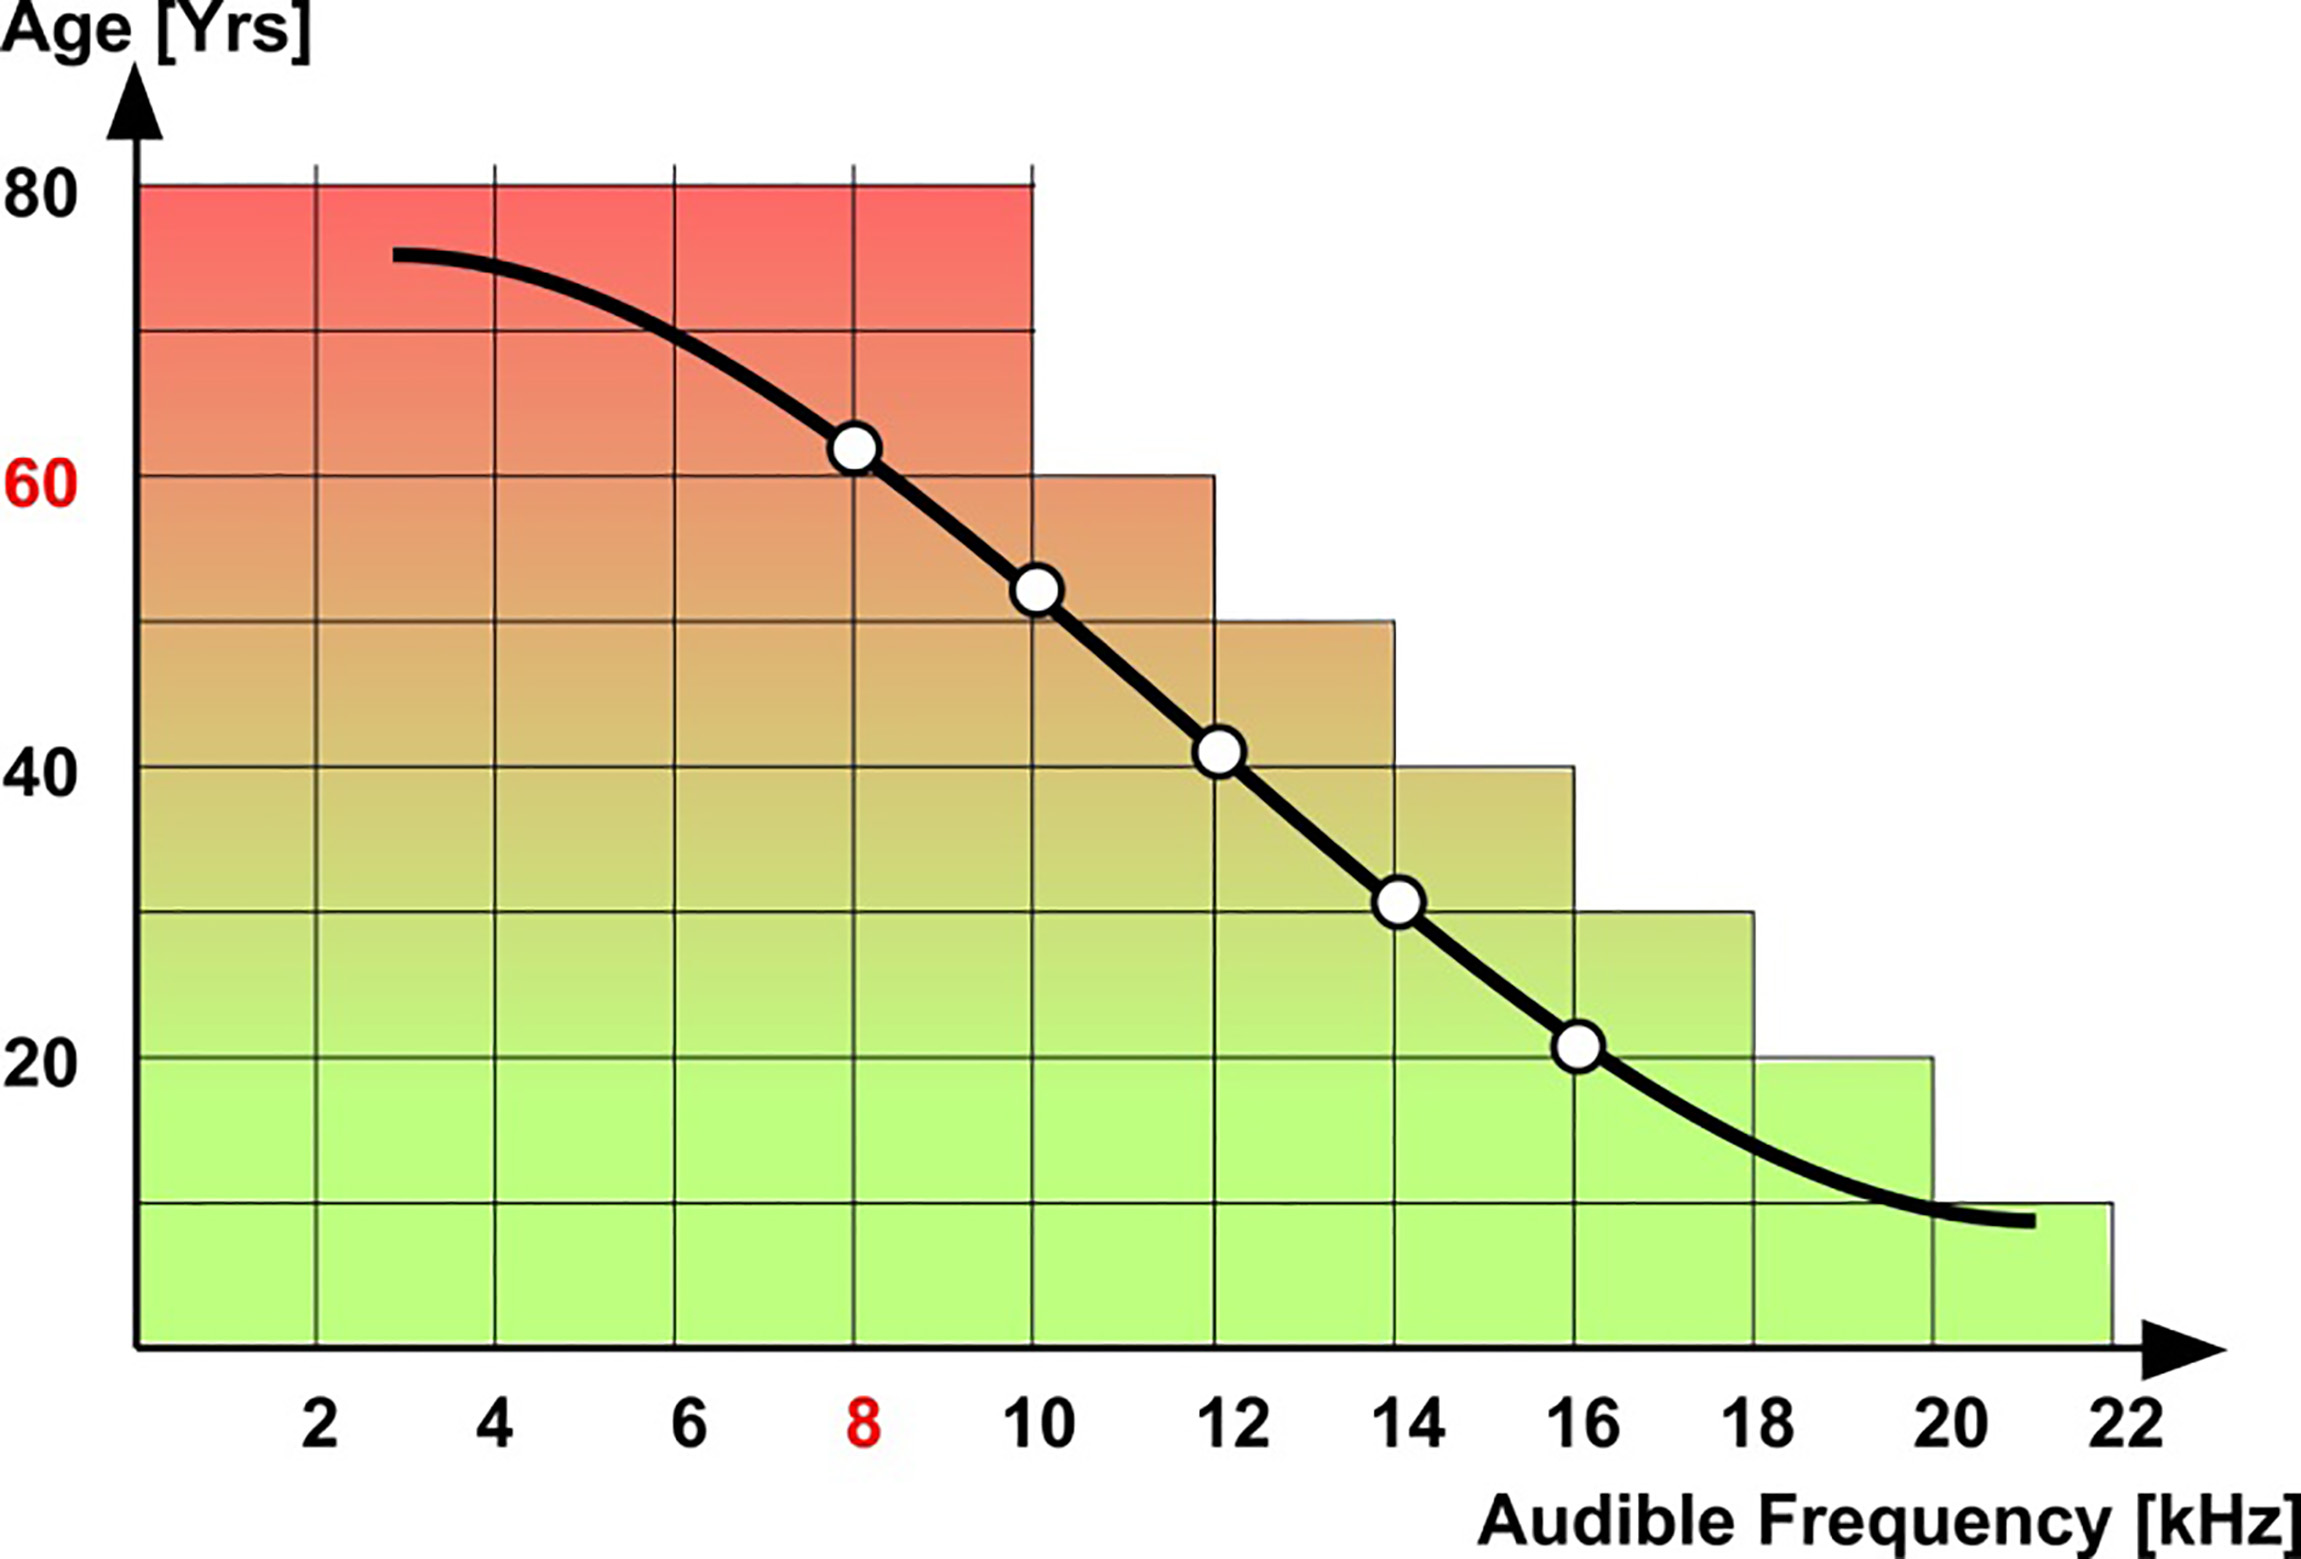 Upper hearing limit in dependence on age. Source [18].